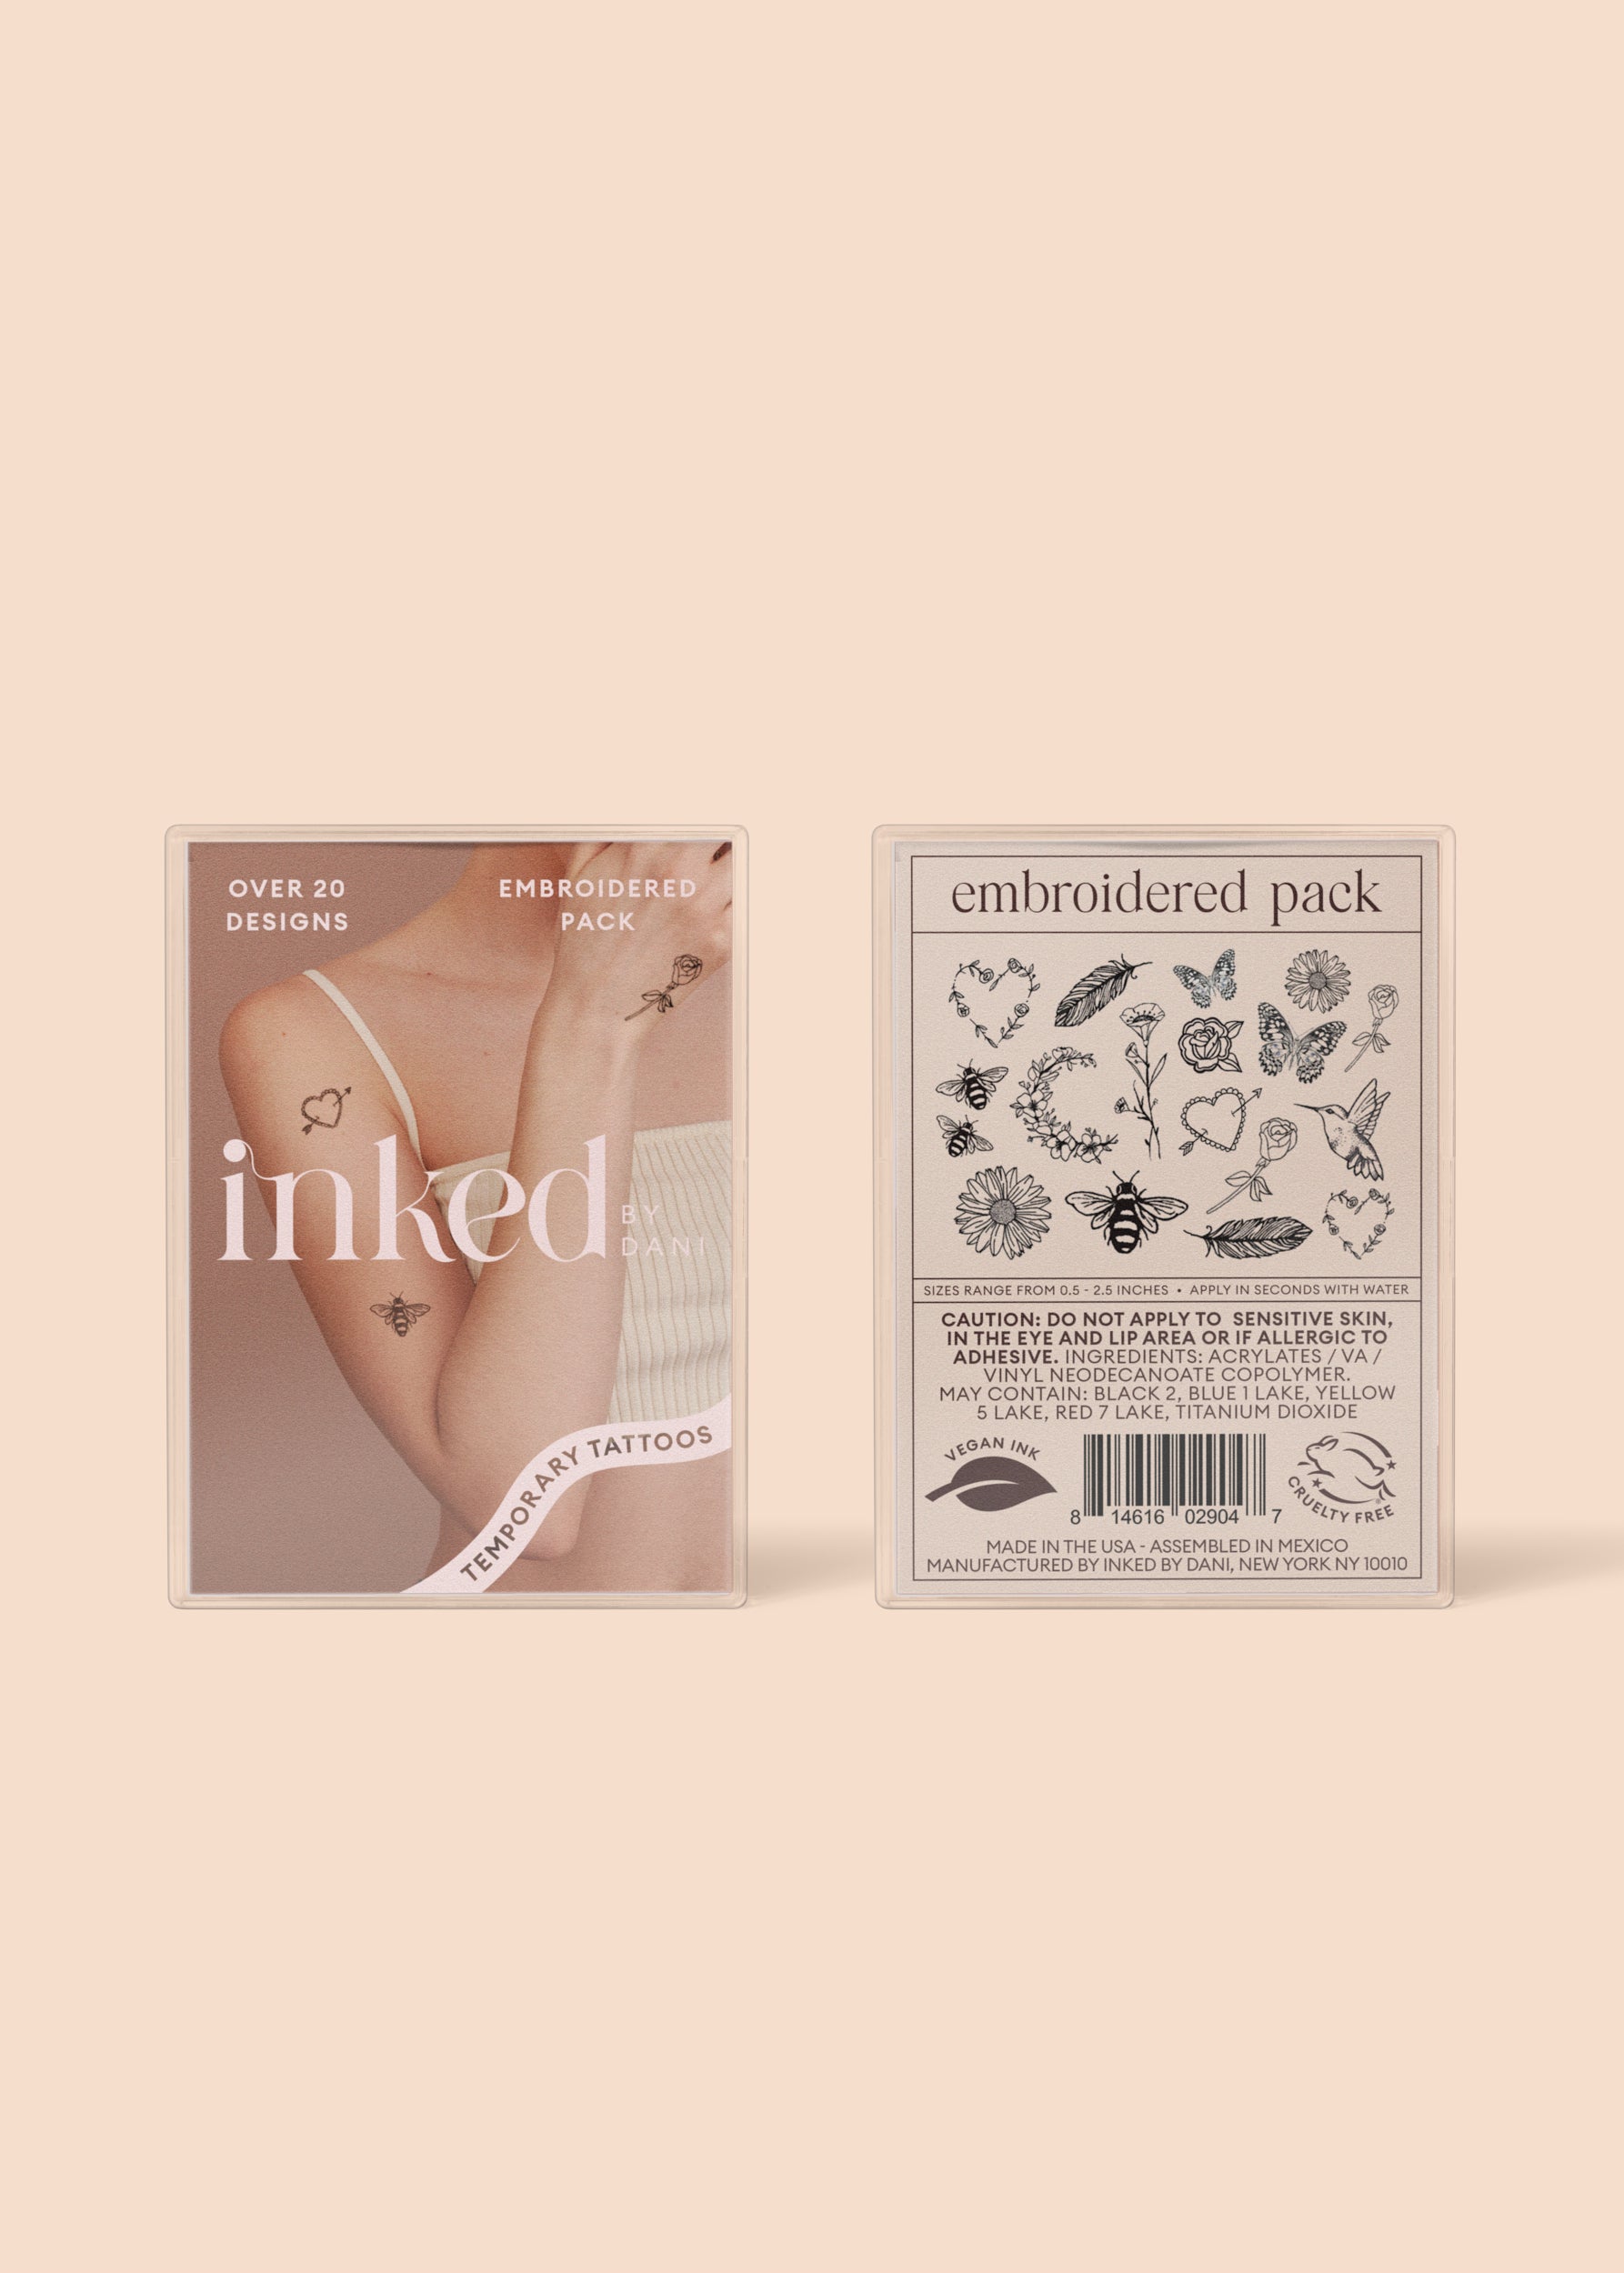 Embroidered Pack | INKED by Dani Temporary Tattoos